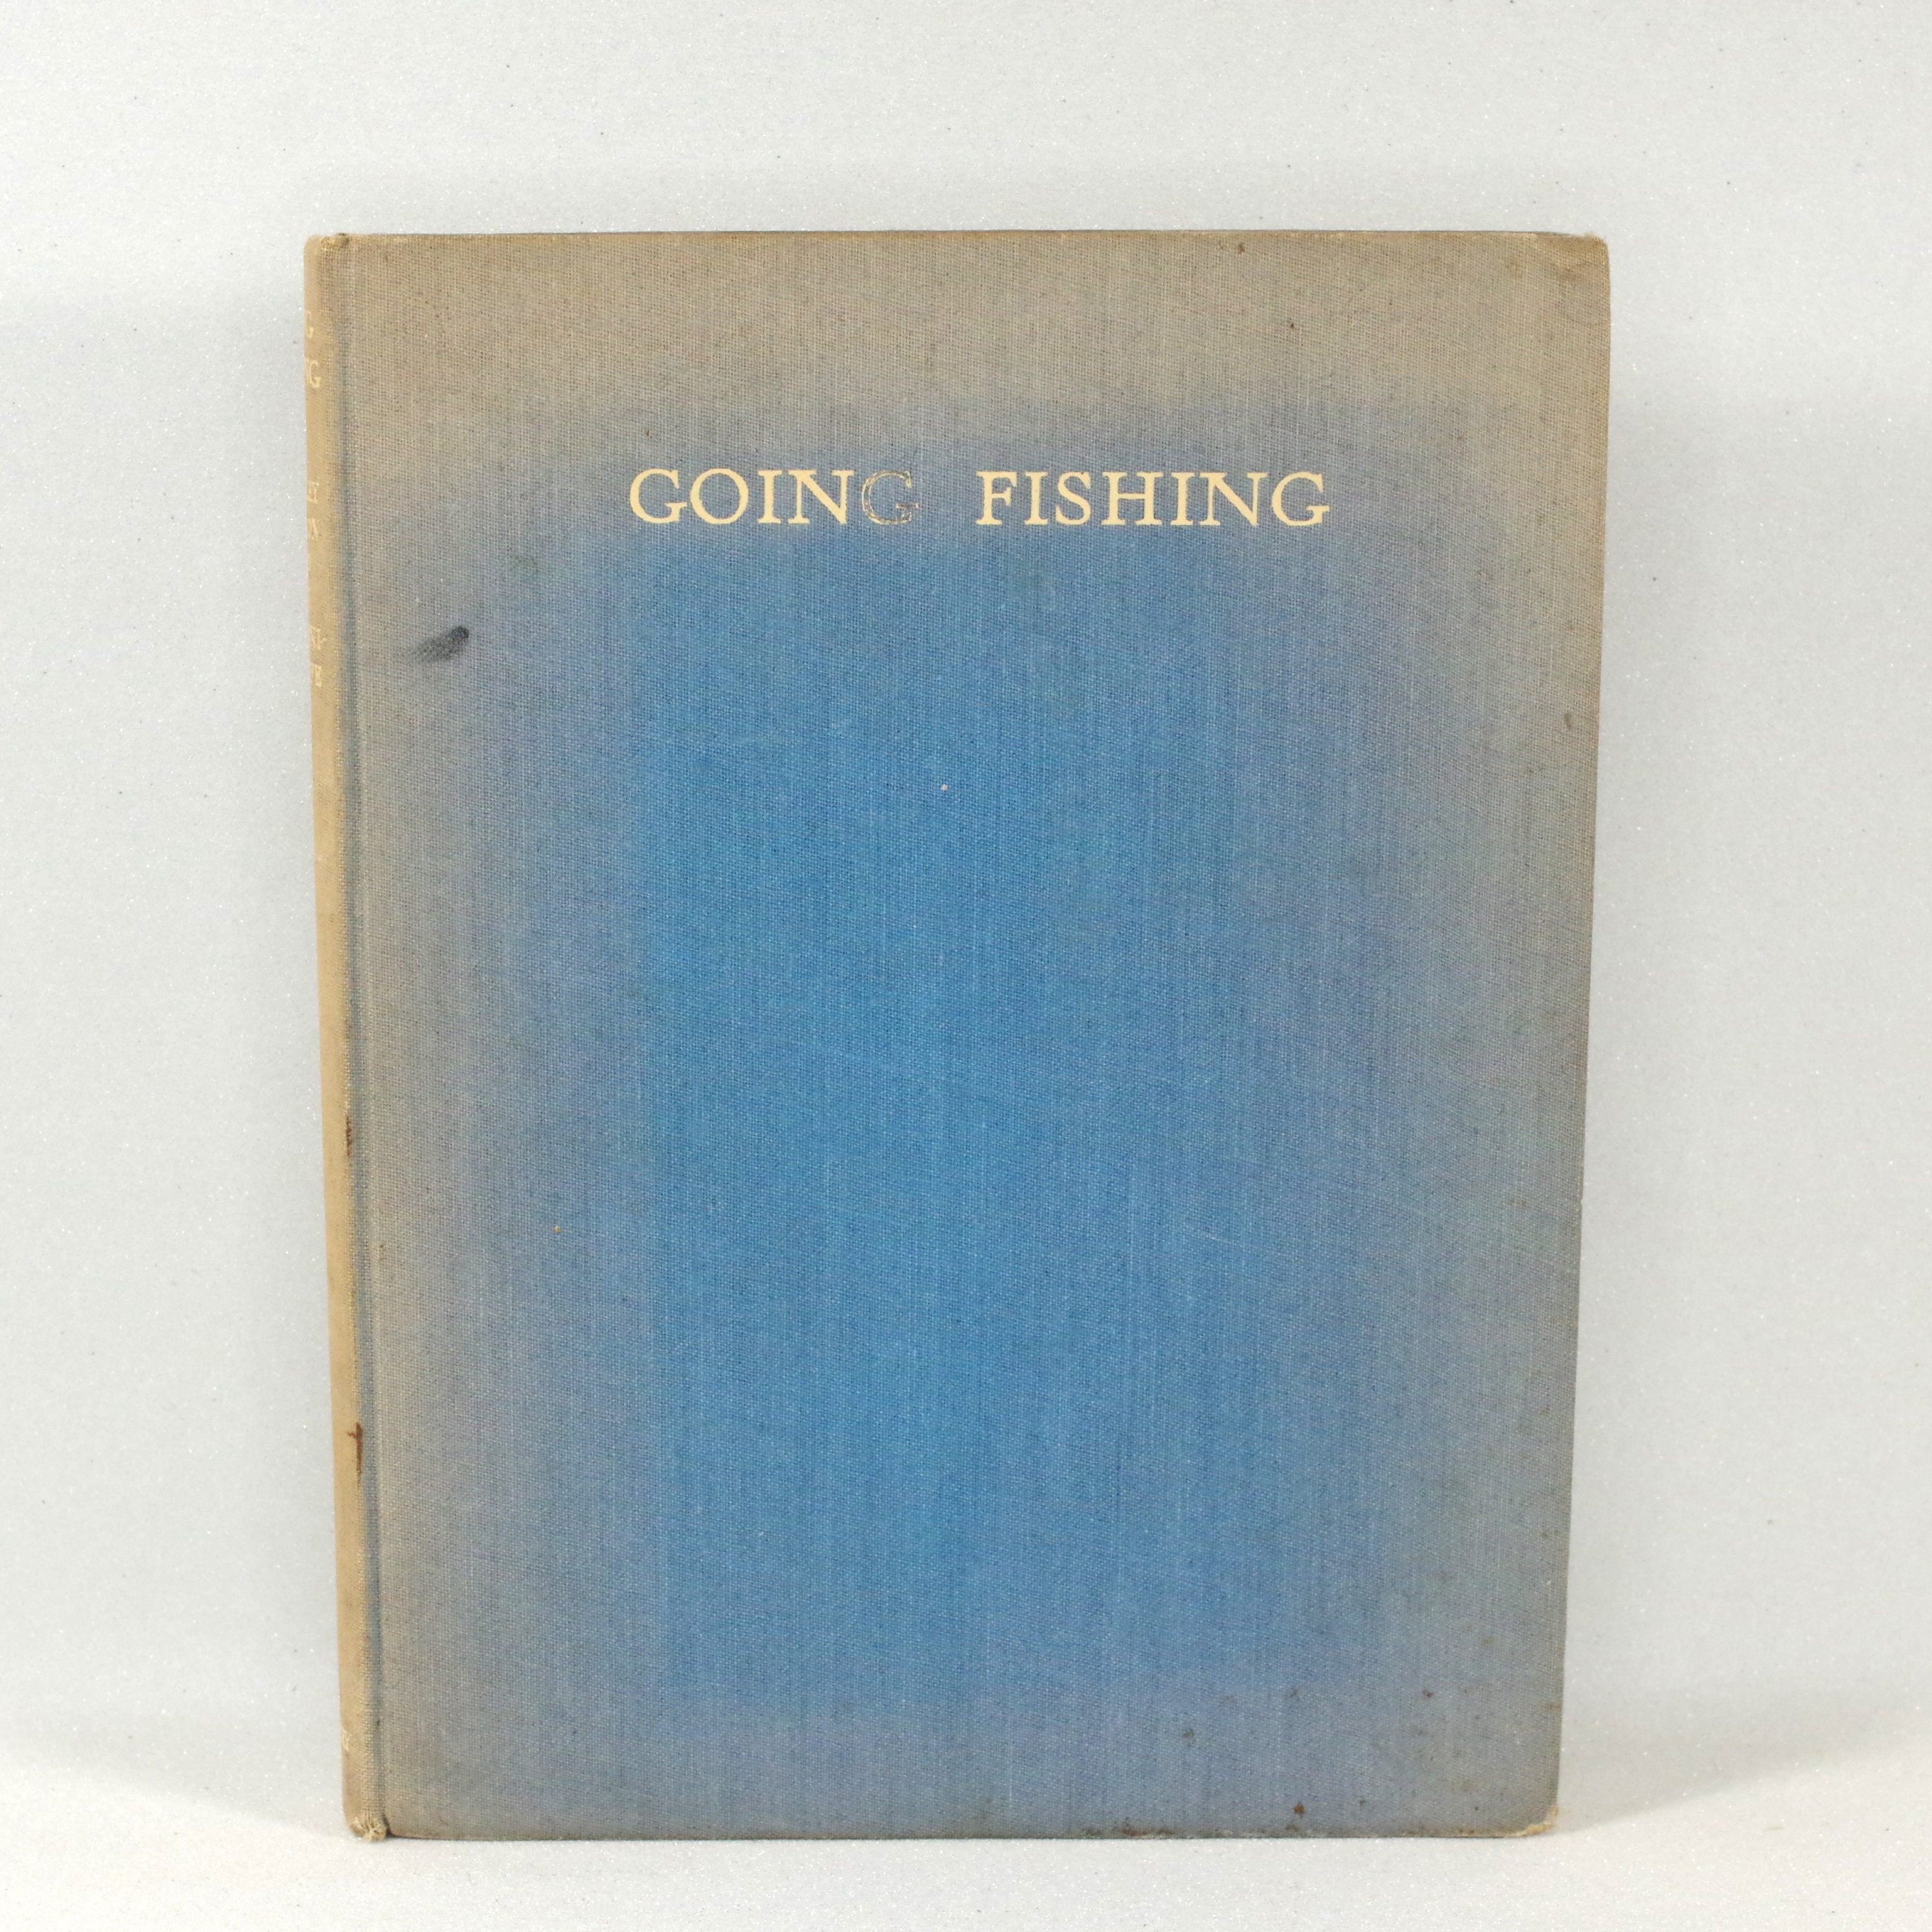 Going Fishing by Negley Farson, Illust. by C. F. Tunnicliffe